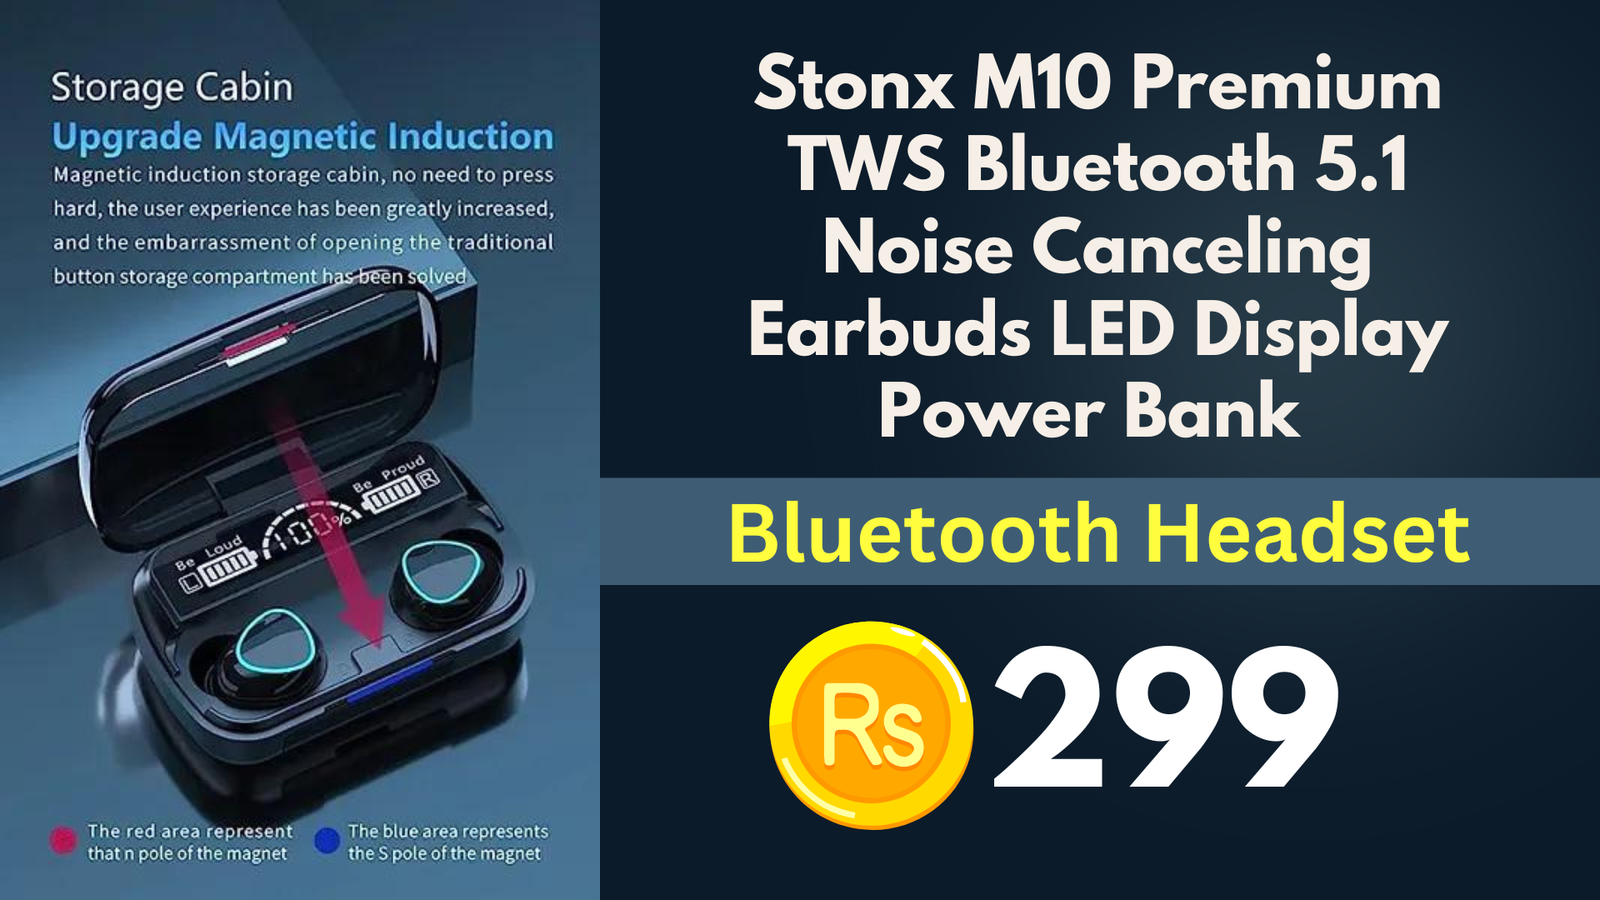 Stonx M10 Premium TWS Bluetooth 5.1 Noise Canceling Earbuds LED Display Power Bank Bluetooth Headset